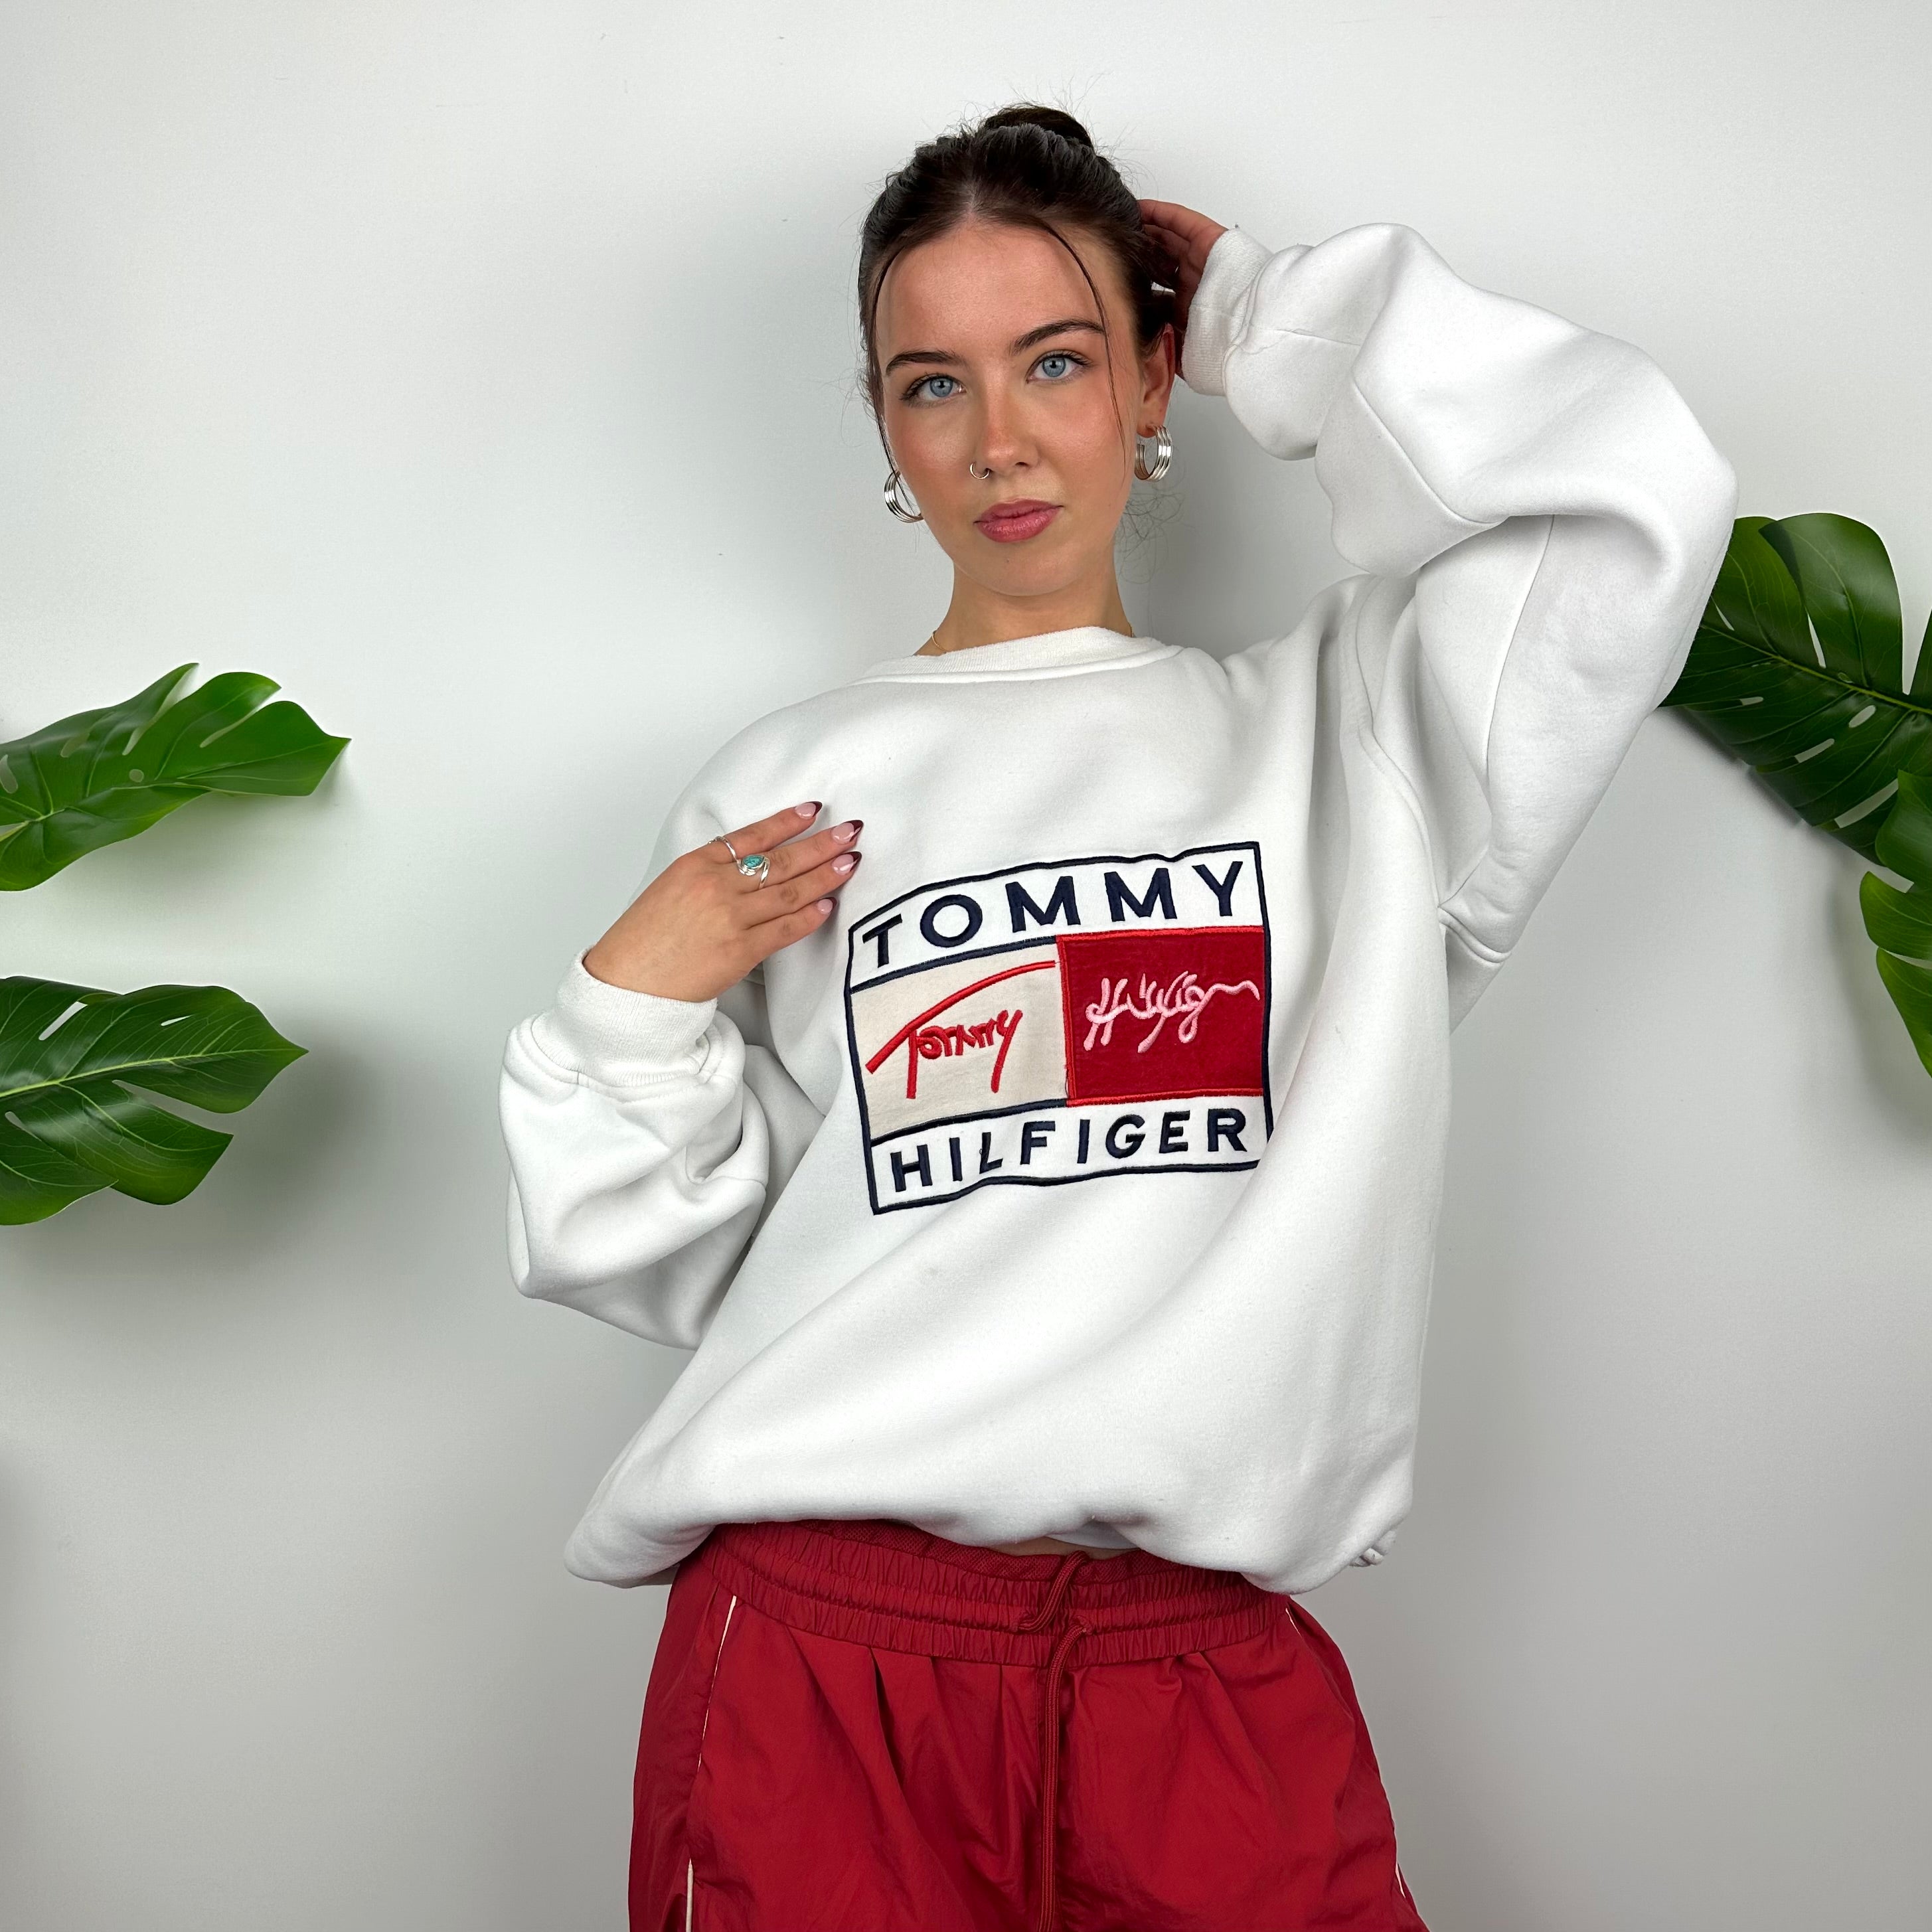 Tommy Hilfiger White Embroidered Spell Out Sweatshirt as worn by Annalivia Hynds (L)